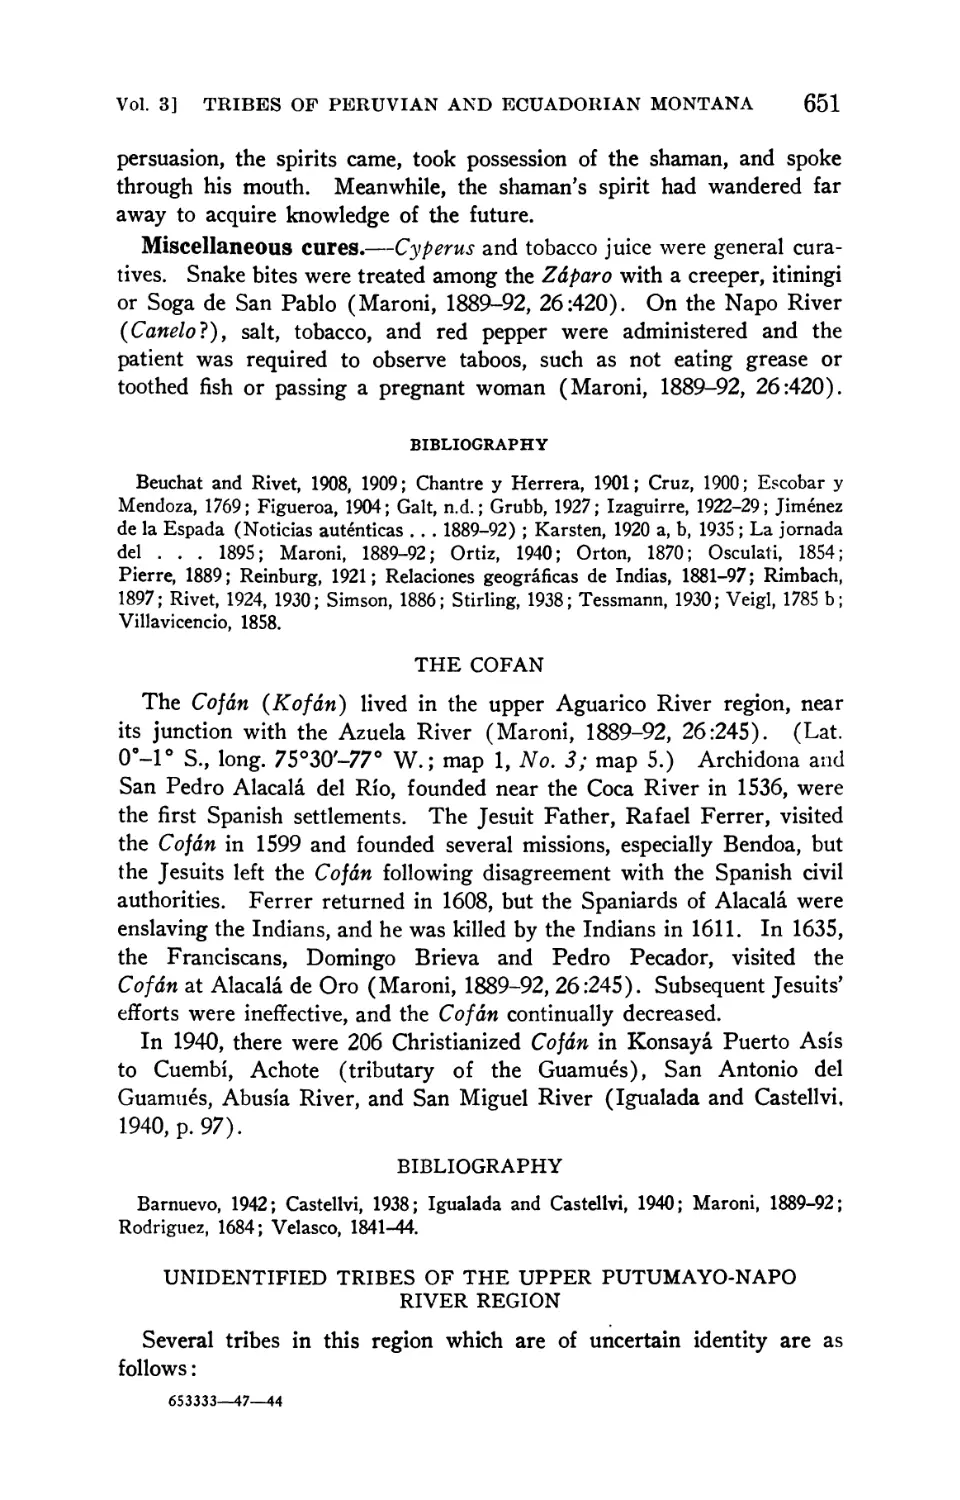 Bibliography
The Cofán
Unidentified tribes of the upper Putumayo-Napo River region